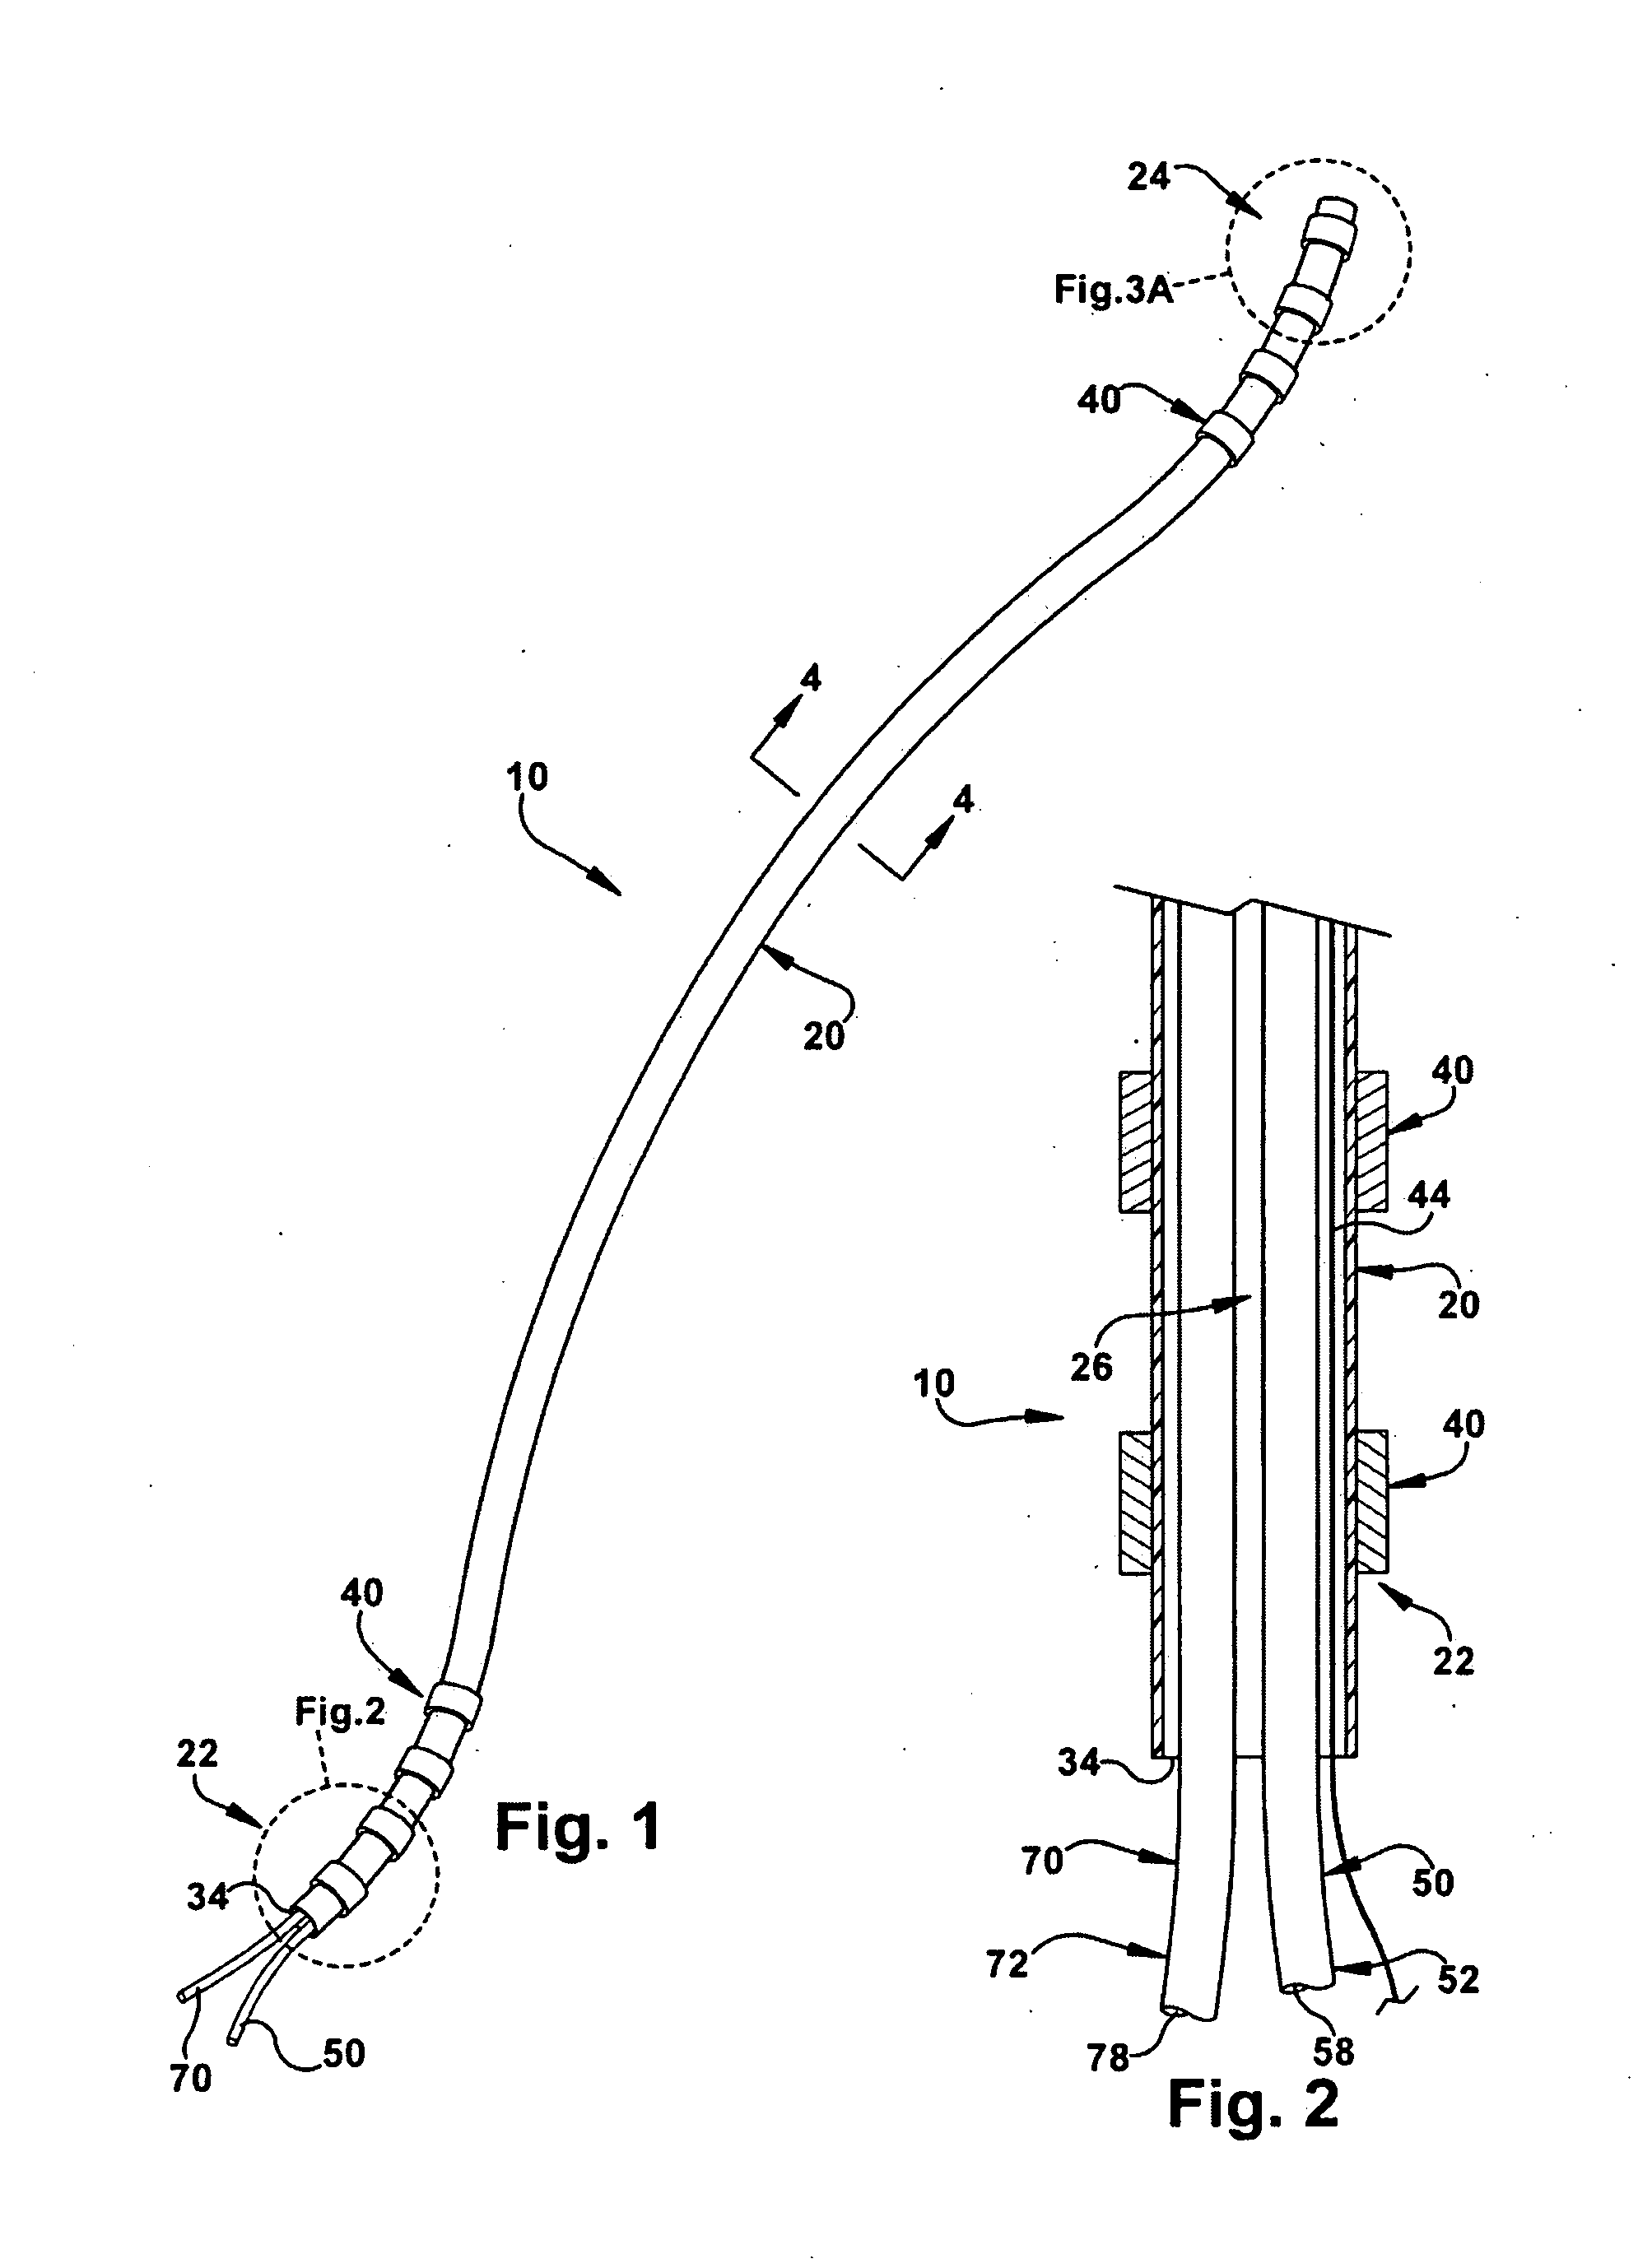 Method and apparatus for securing a neuromodulation lead to nervous tissue or tissue surrounding the nervous system